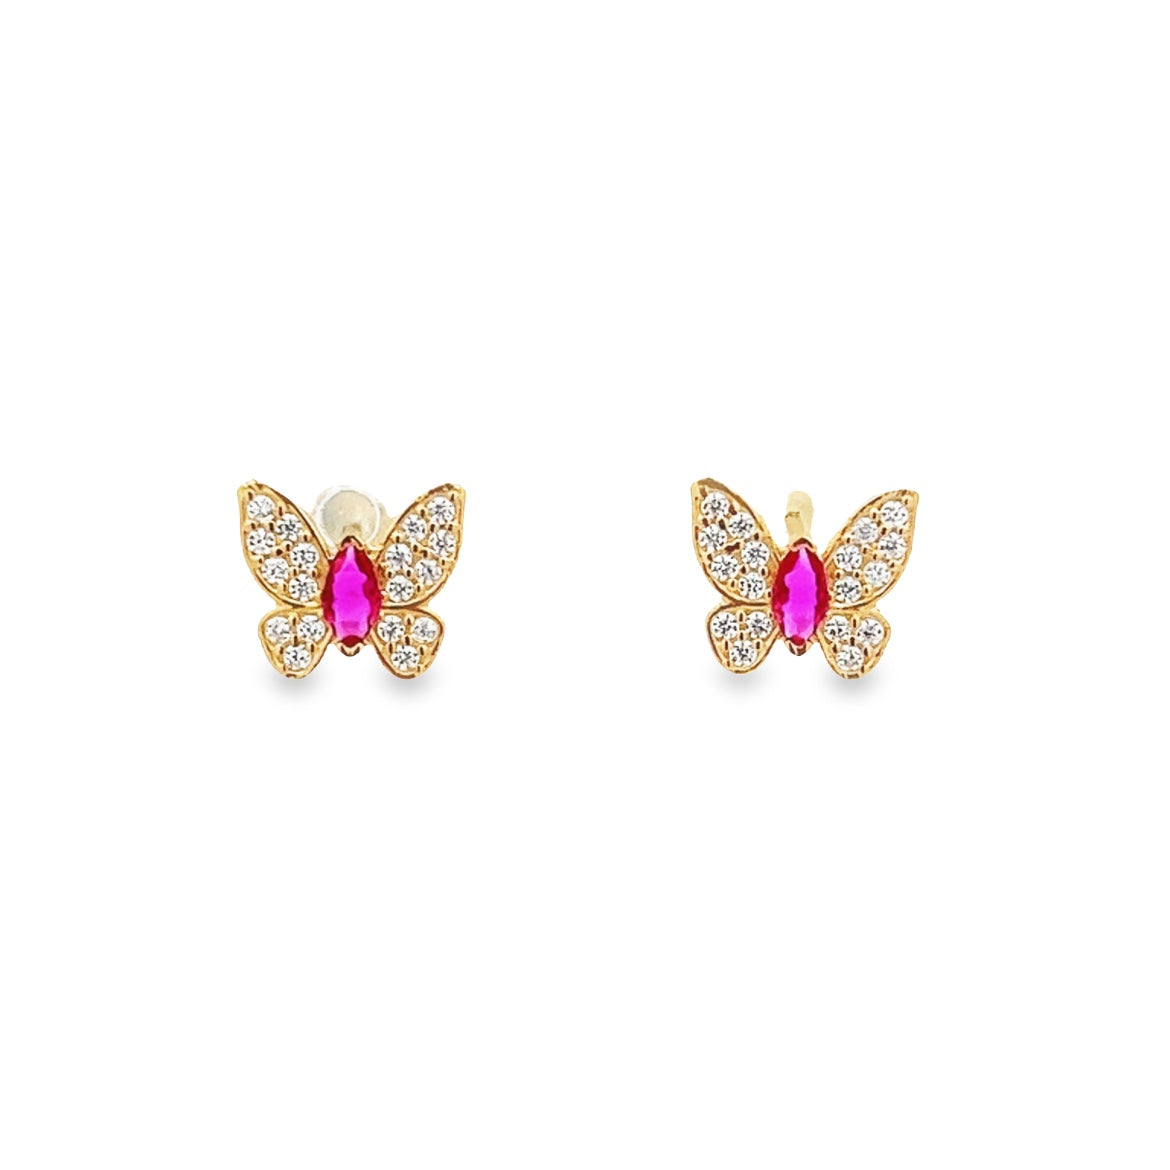 14K GOLD BUTTERFLY EARRINGS WITH CRYSTALS